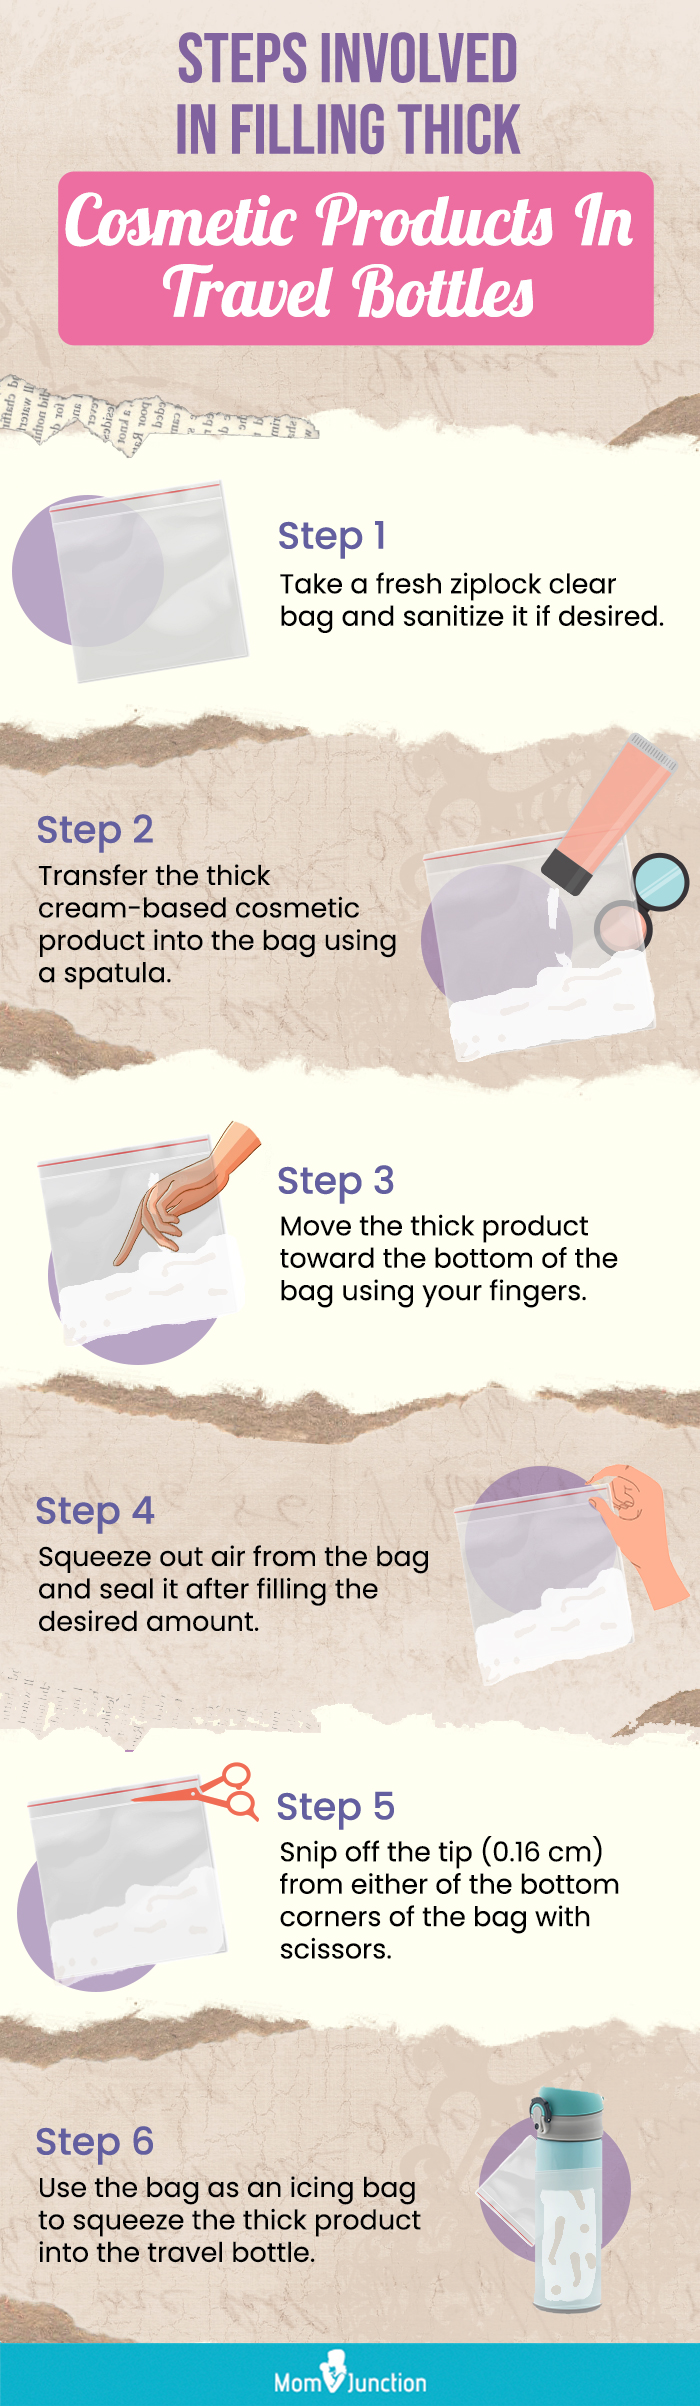 Steps Involved In Filling Thick Cosmetic Products In Travel Bottles(infographic)